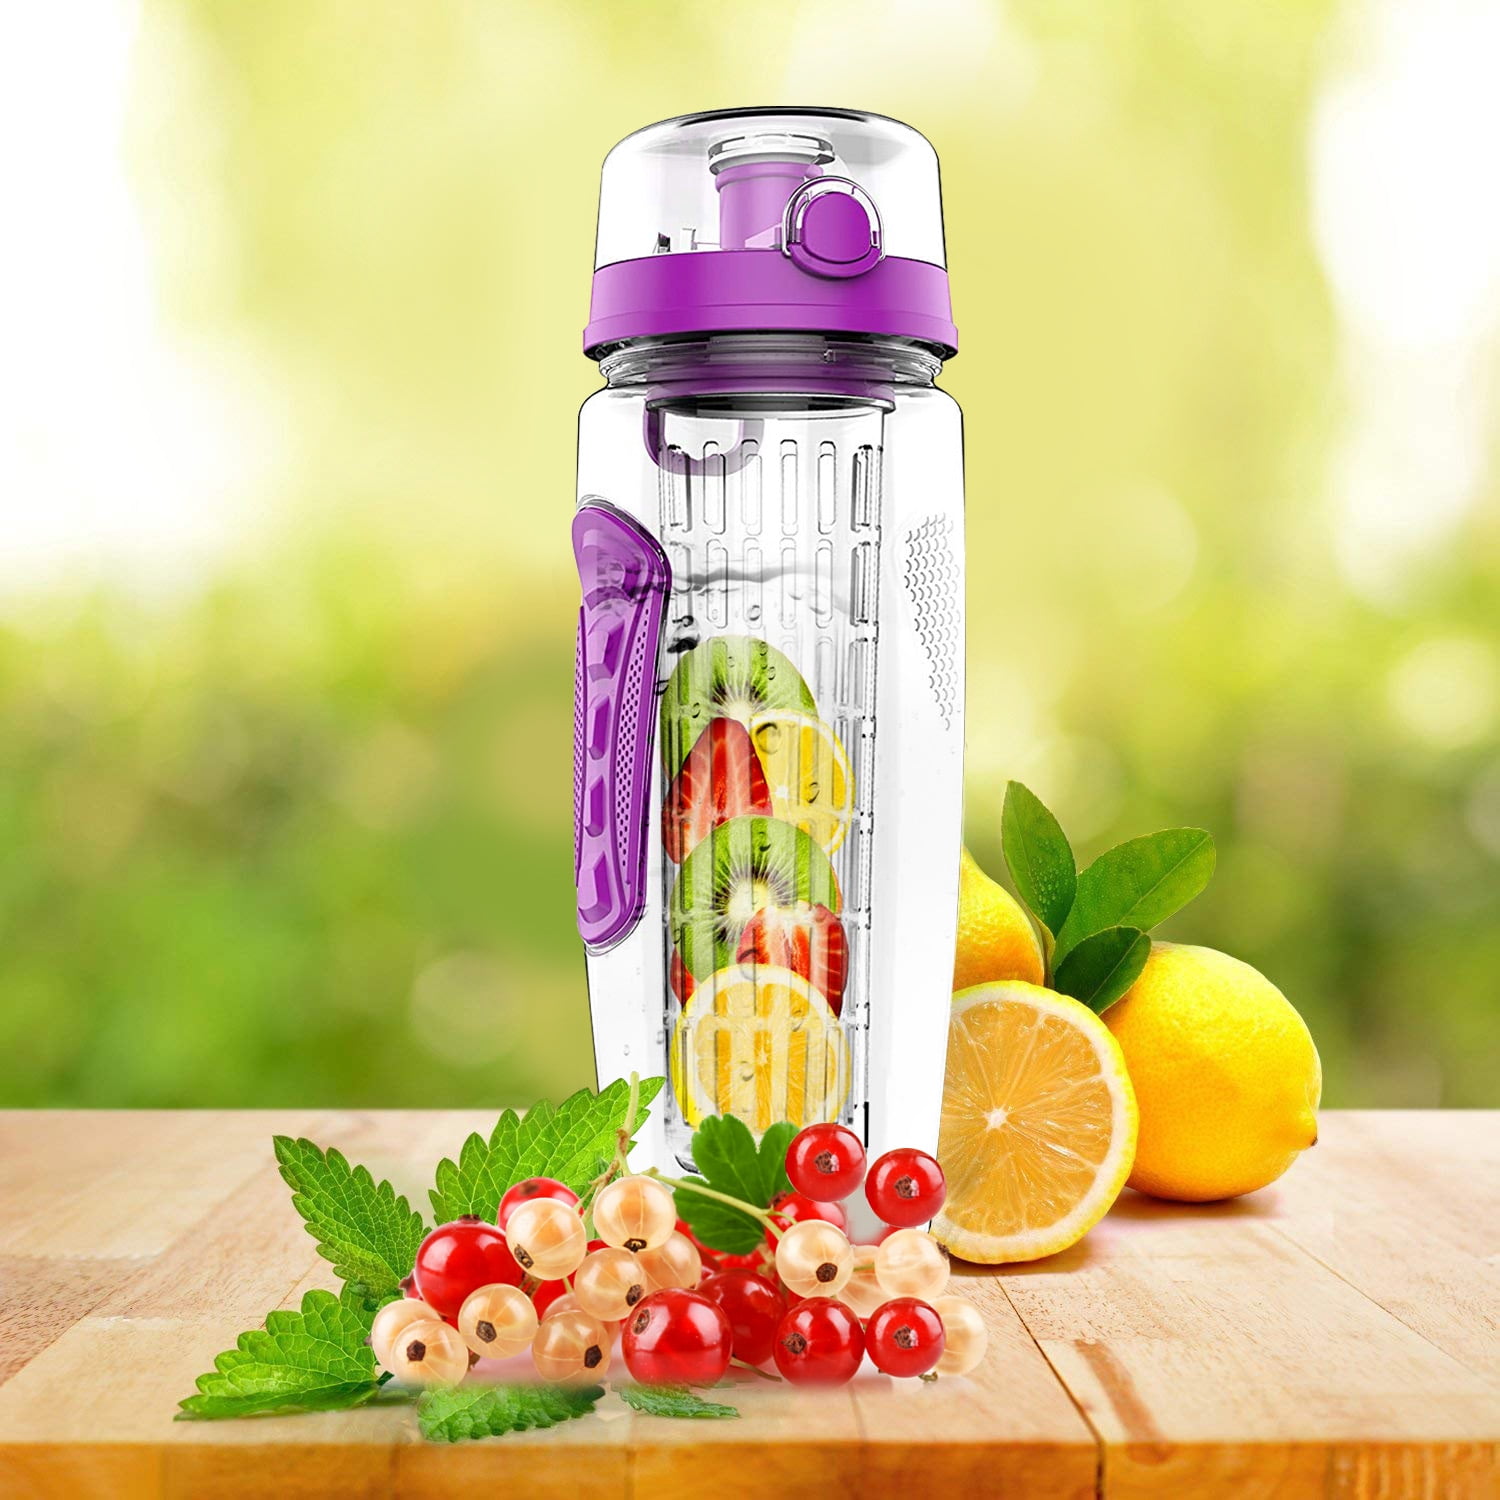 Brimma Fruit Infuser Water Bottle - 32 oz Large, Leakproof Plastic Fruit  Infusion Water Bottle for Gym, Camping, and Travel